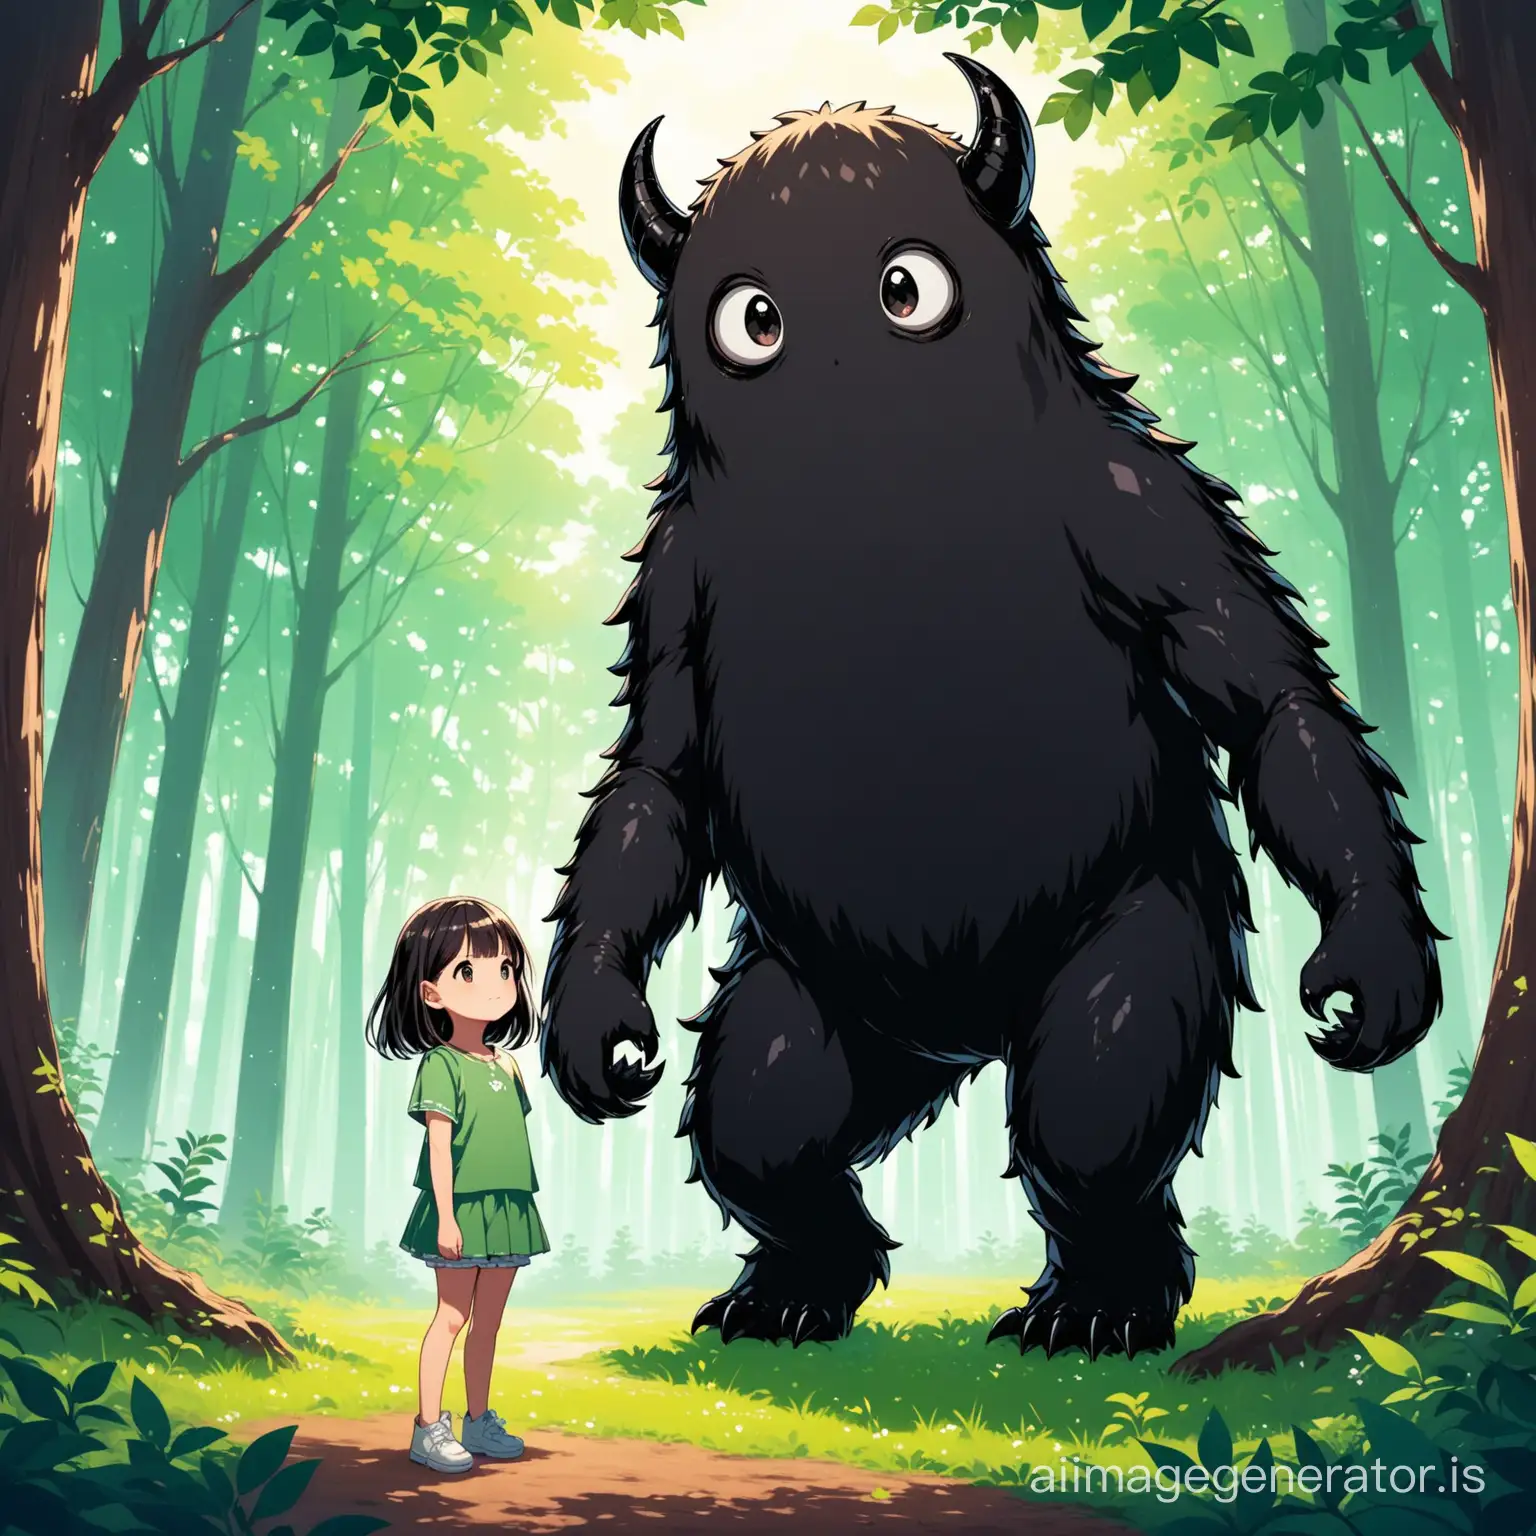 Young-Girl-Standing-Beside-Small-Black-Monster-in-Forest-Setting